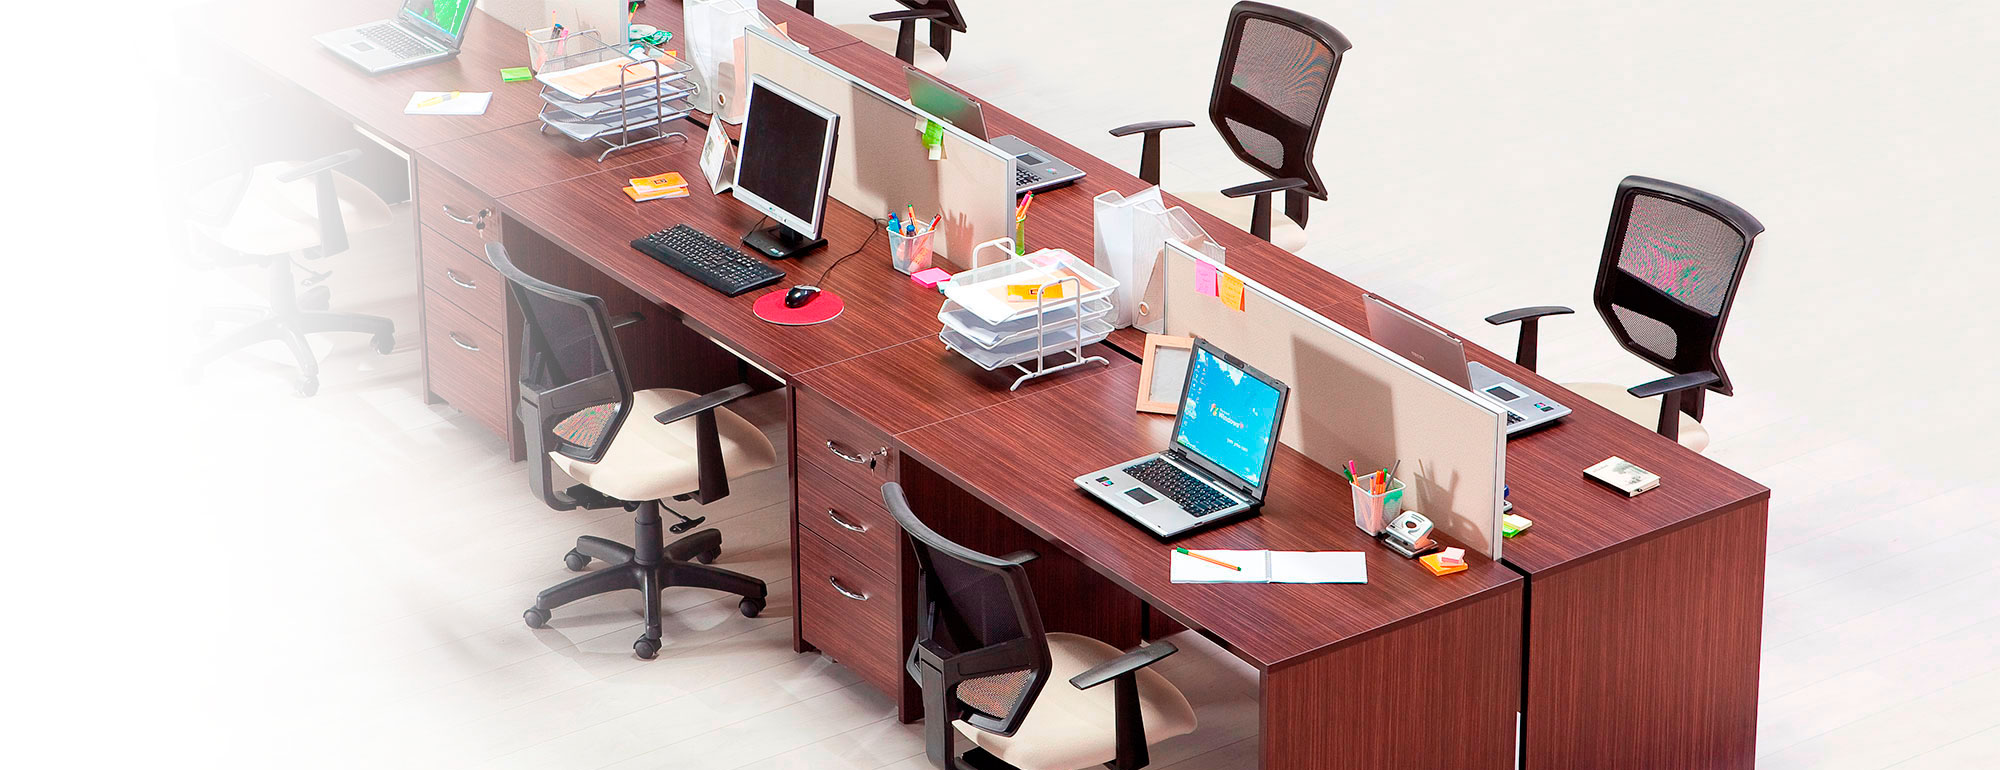 IDEAL DESIGN helps the successful development of your business by creating ergonomic and stylish office furniture. 